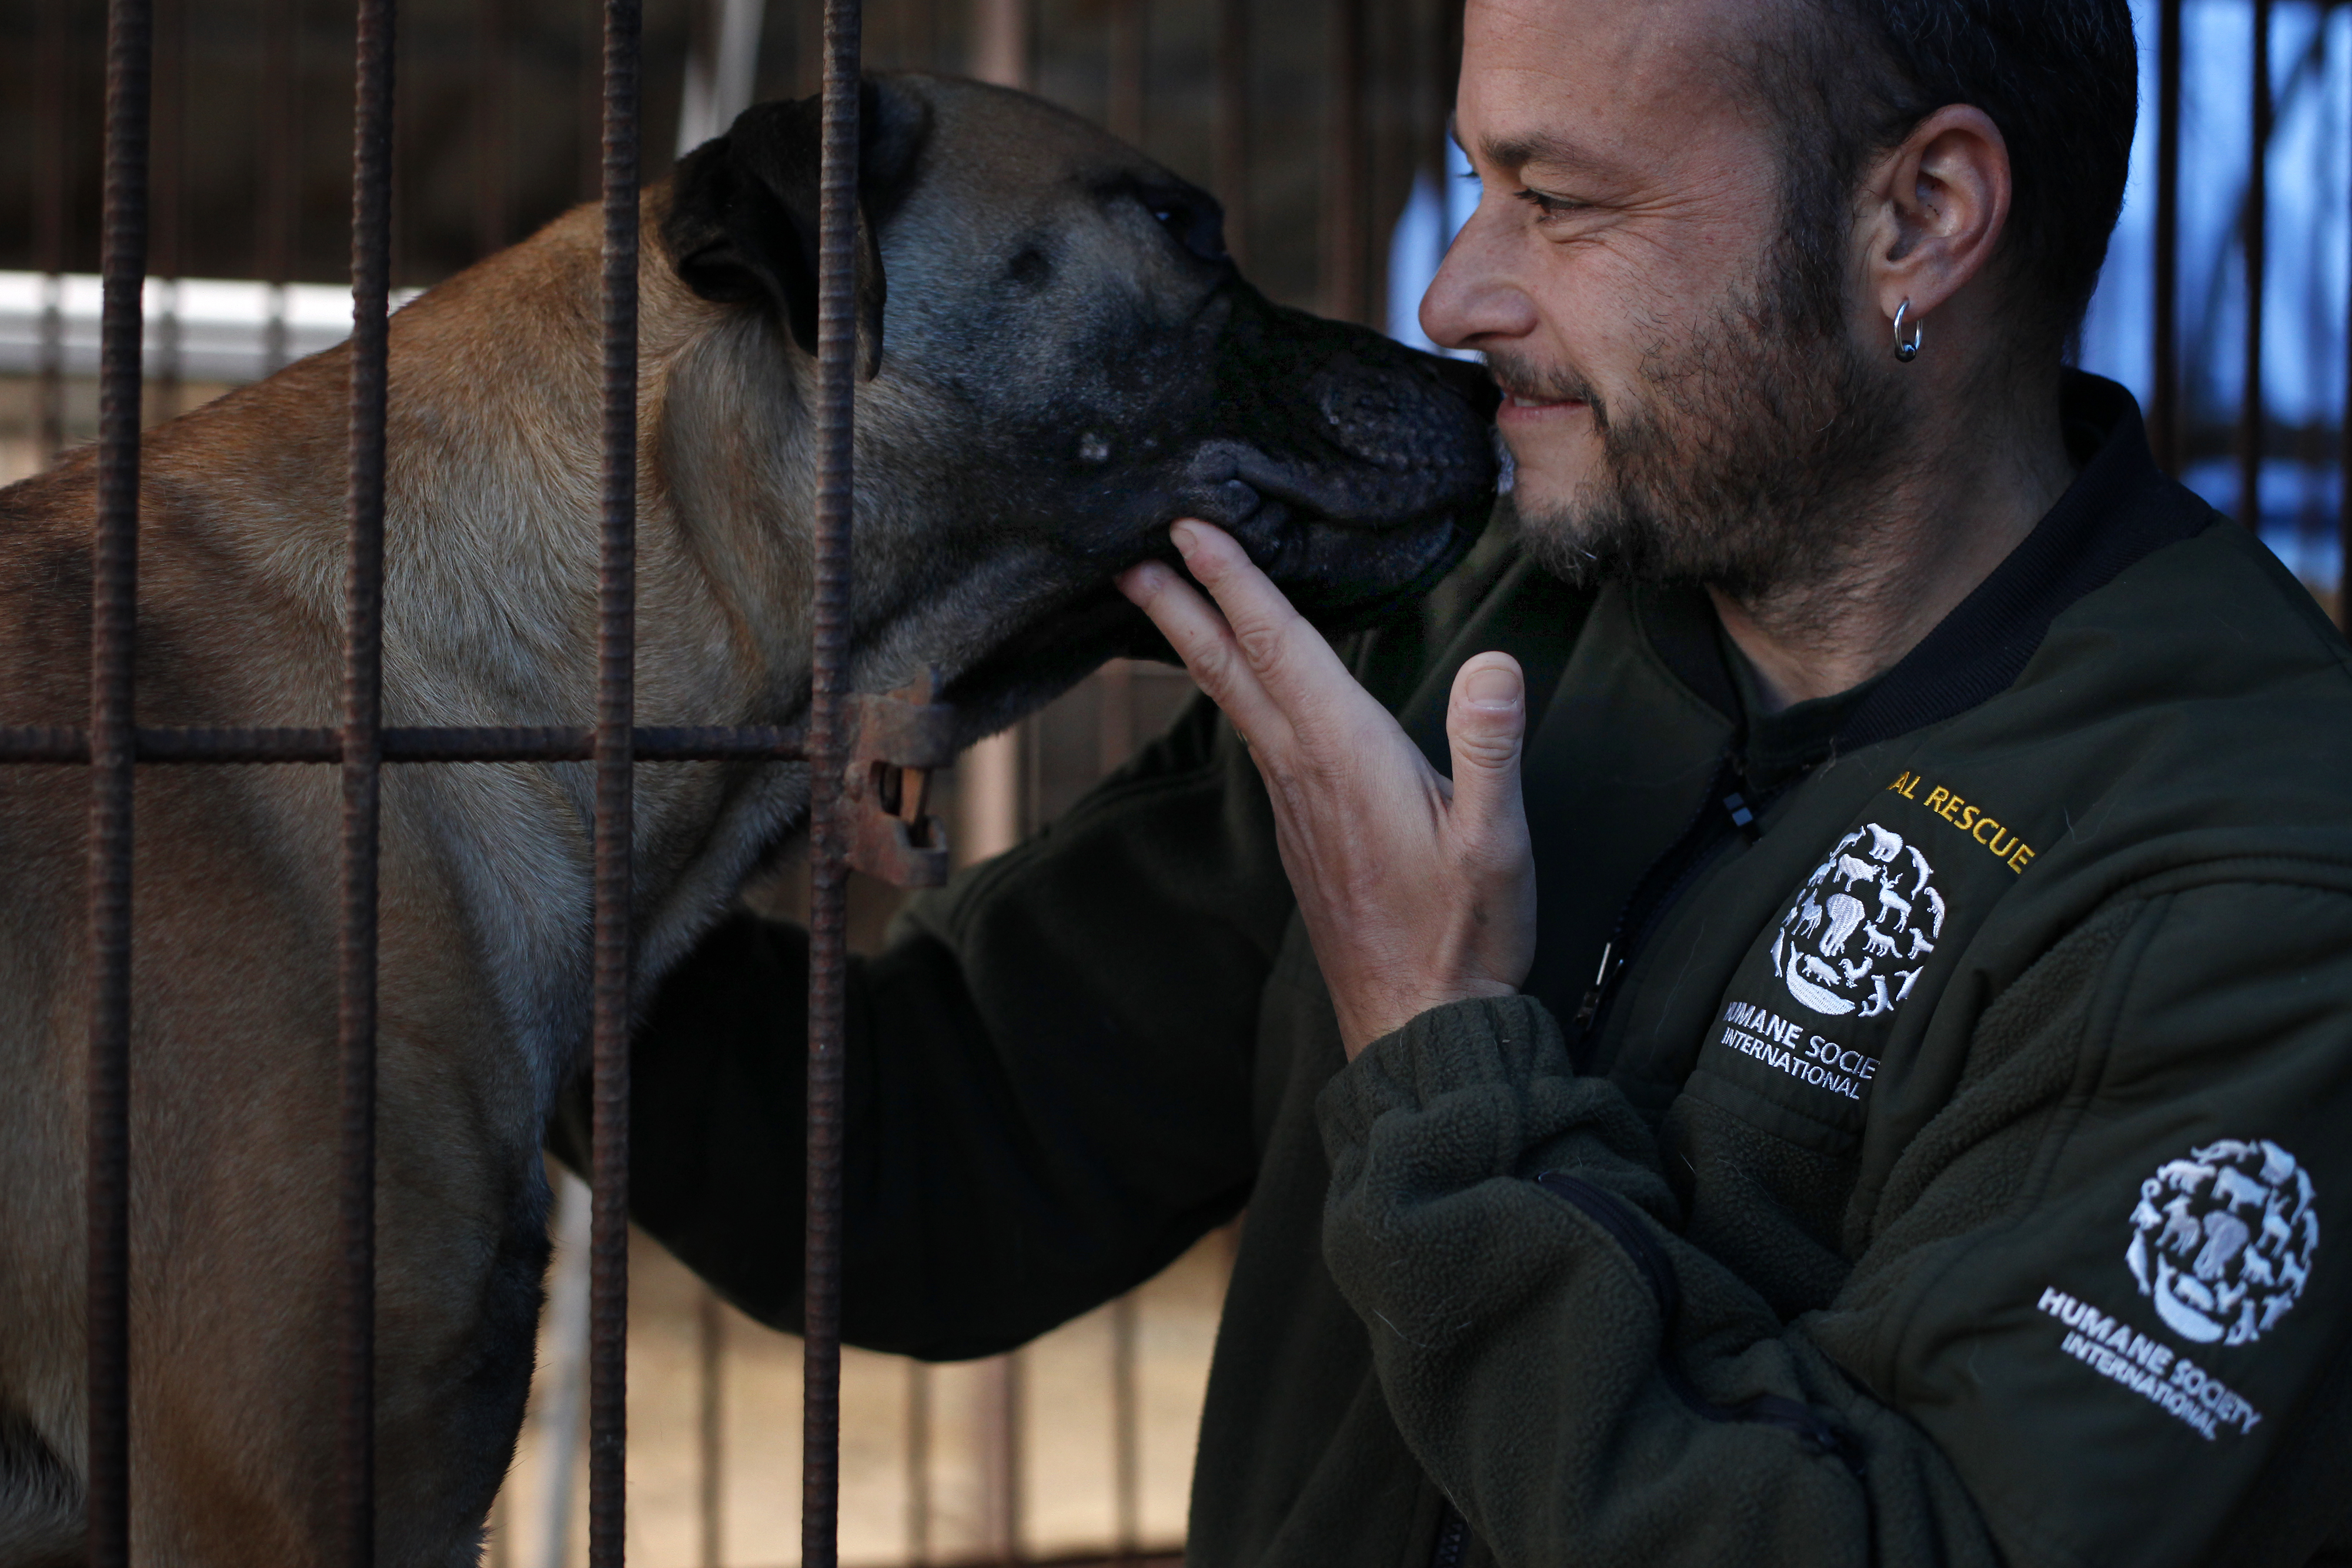 IMAGE DISTRIBUTED FOR THE HUMANE SOCIETY OF THE UNITED STATES - Adam Parascandola, director of animal protection and crisis response for Humane Society International, interacts with Julius at a dog meat farm in Wonju, South Korea on Monday, Nov. 21, 2016. HSI provided all 150 dogs with vaccinations and warm bedding, and is in the process of closing down the farm and rescuing the dogs. HSI is the leading animal welfare organization working to end Asias dog meat trade, including in South Korea where around 17,000 farms breed up to 2.5 million dogs for human consumption annually. More information is available at www.hsi.org/dogmeat. (Woohae Cho/AP Images for The Humane Society of the United States)